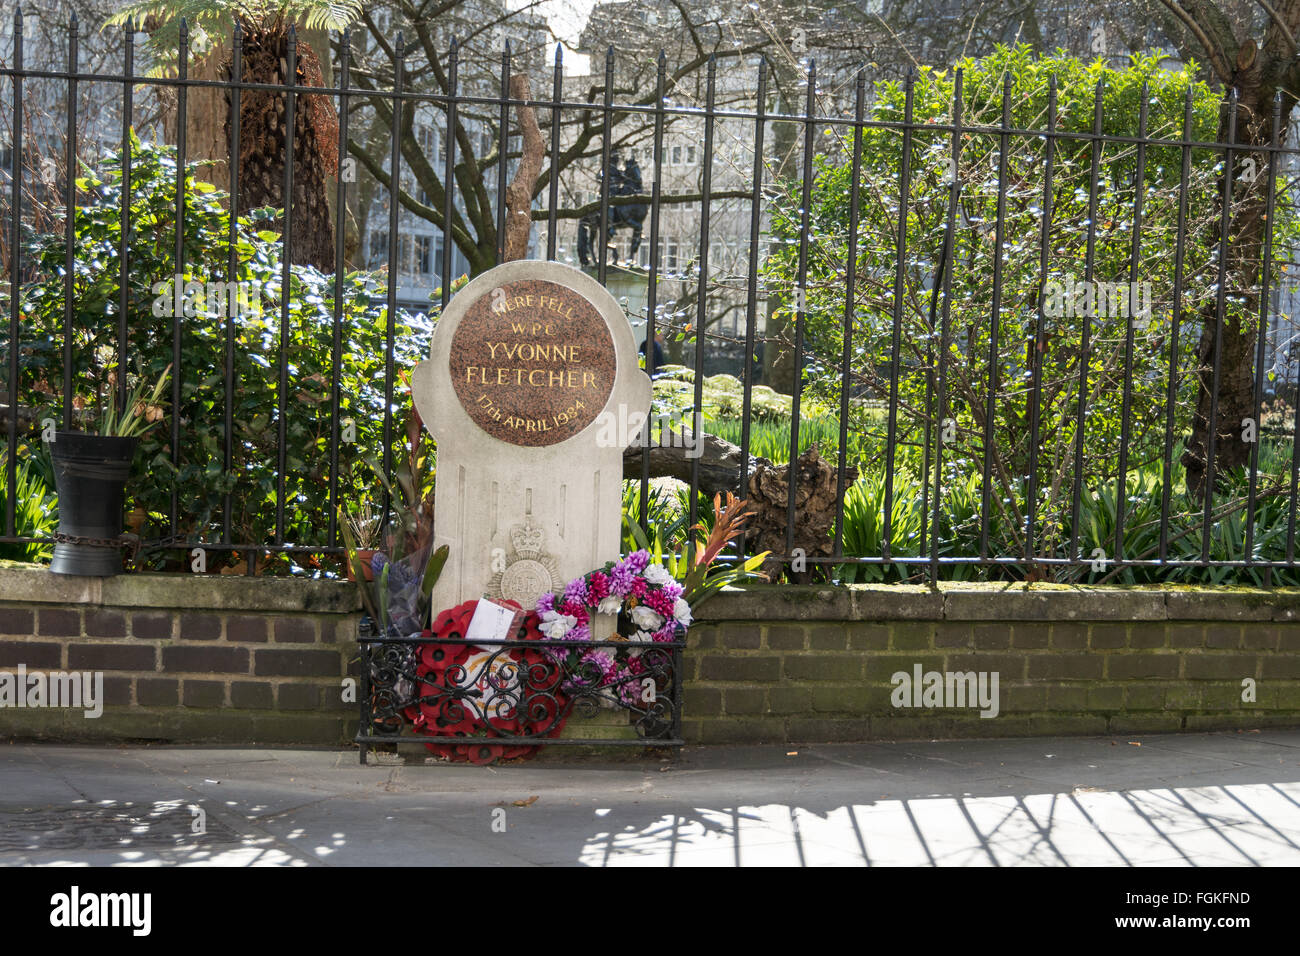 Memorial to PC Yvonne Fletcher, a policewoman killed during a protest outside Libyan Embassy in London, in 1984. Stock Photo